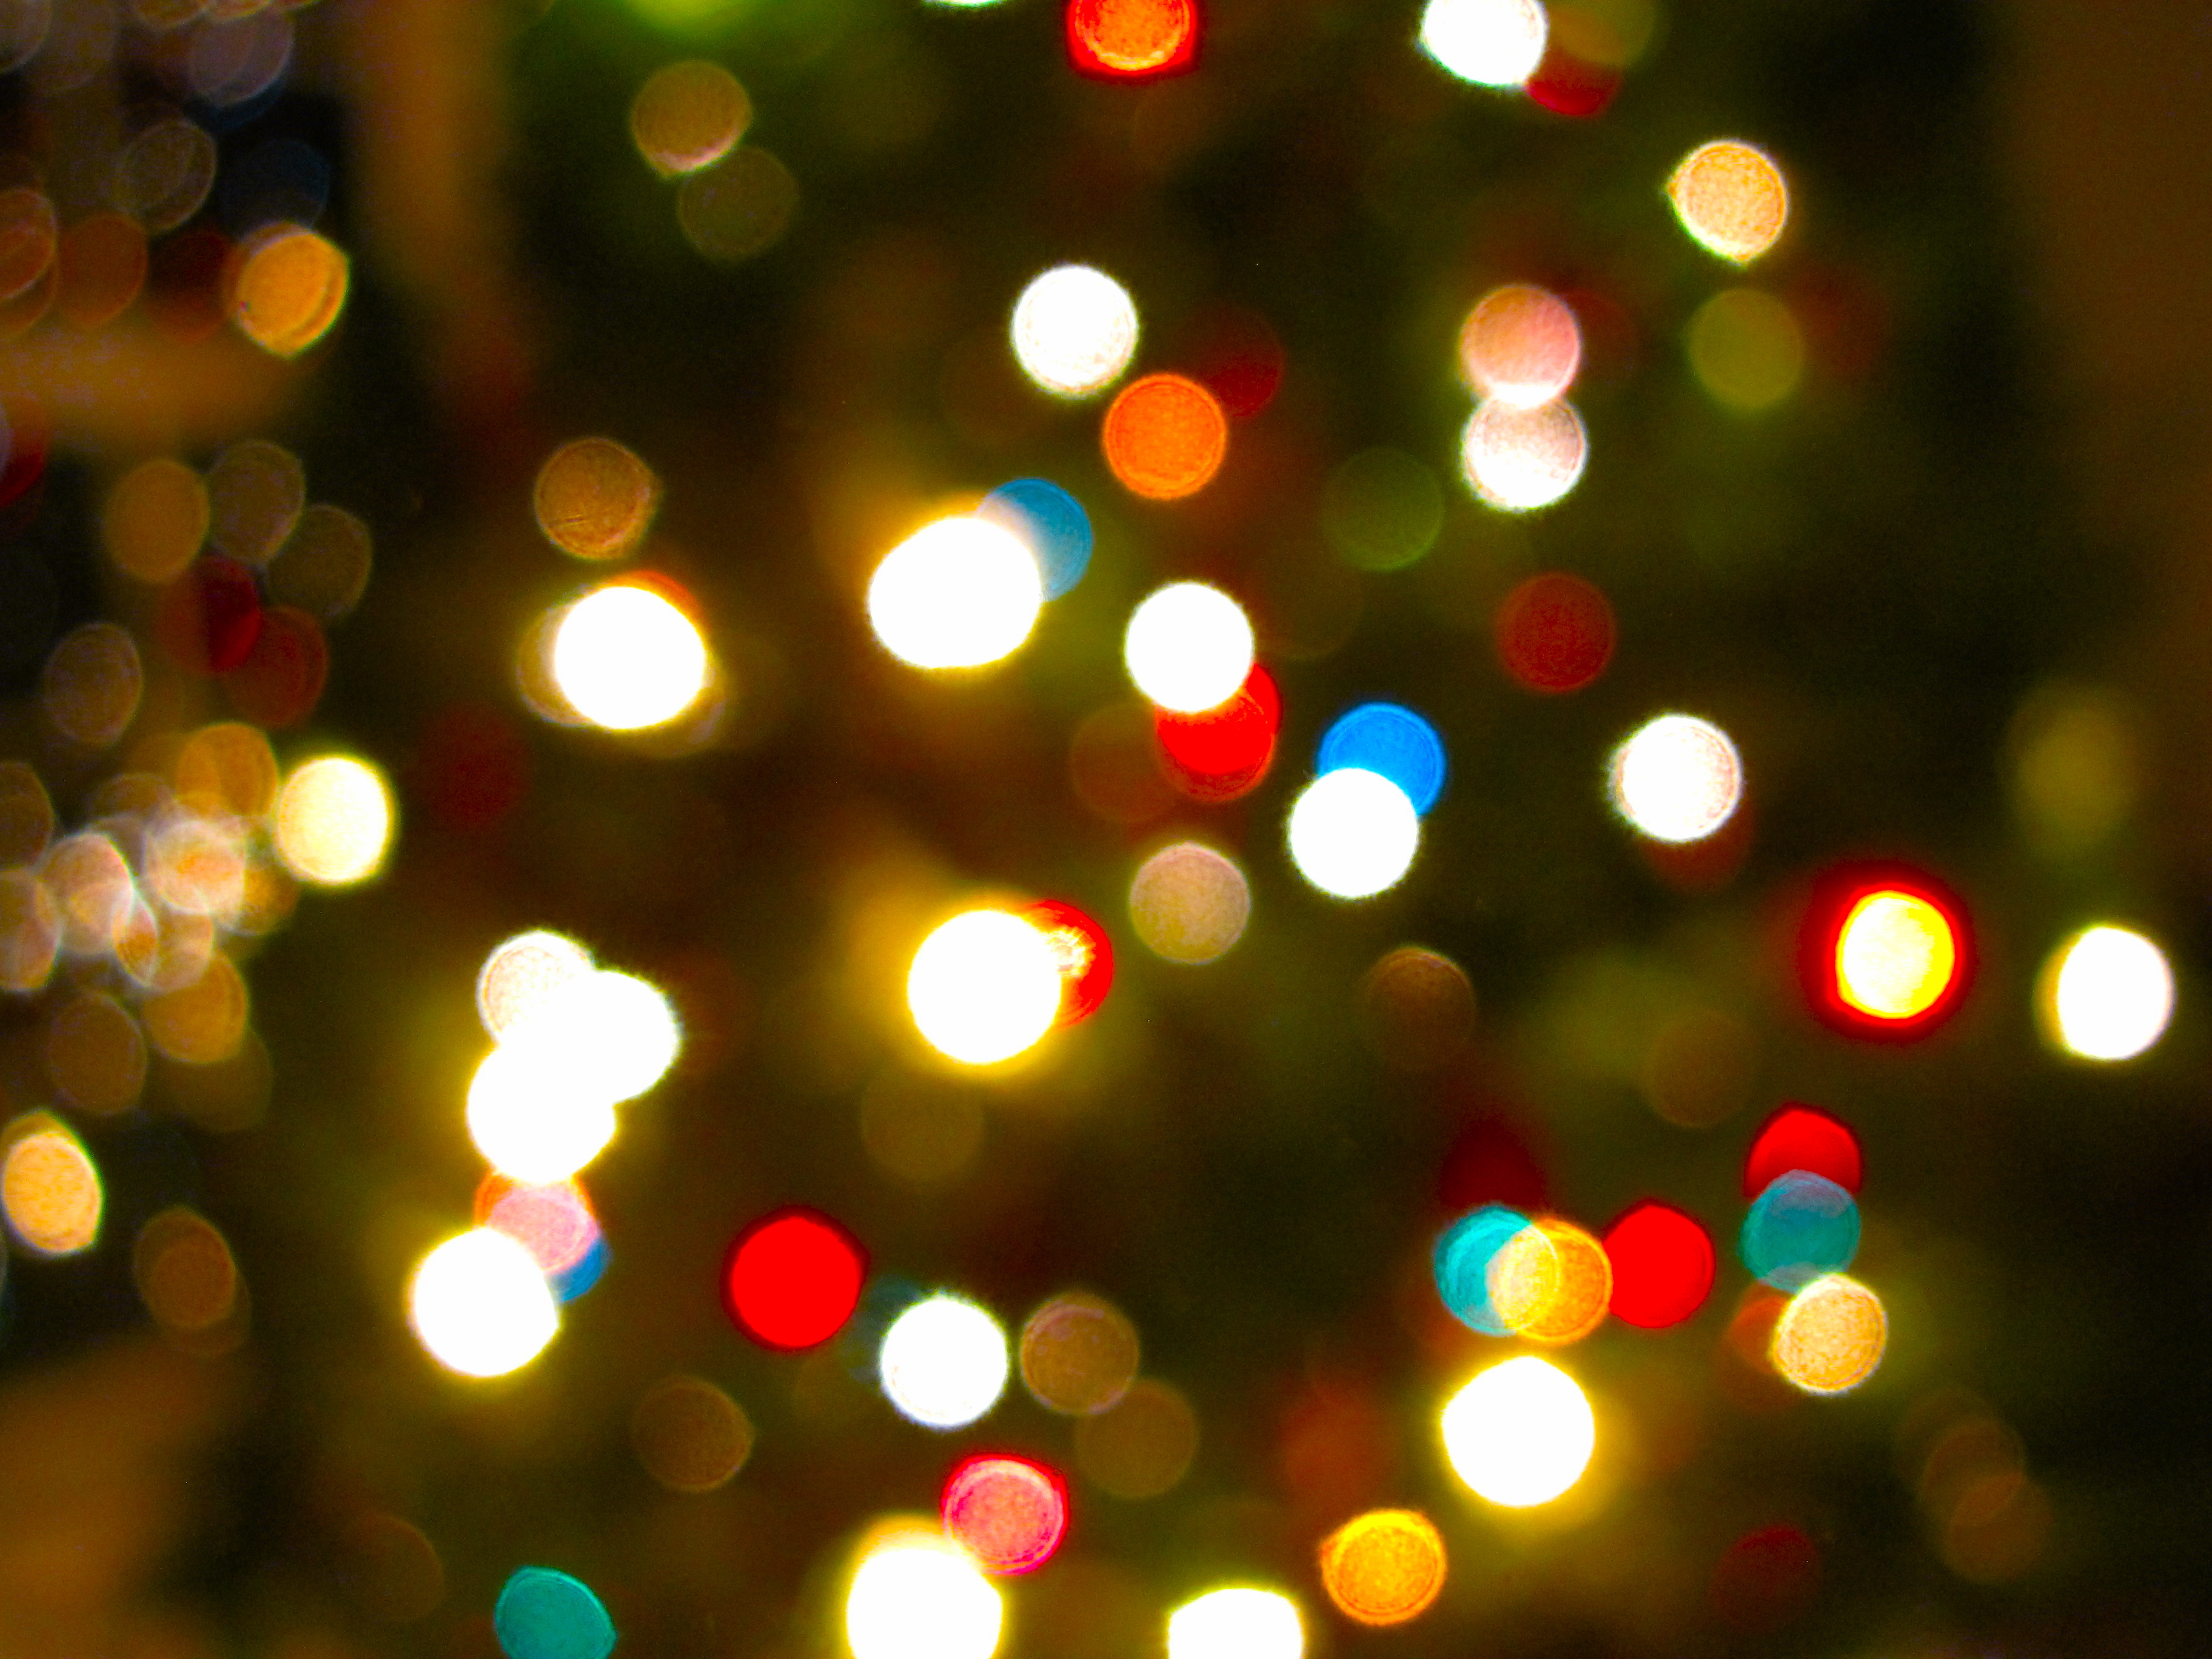 Our Christmas Tree: Bokeh Style - Gathered In The Kitchen